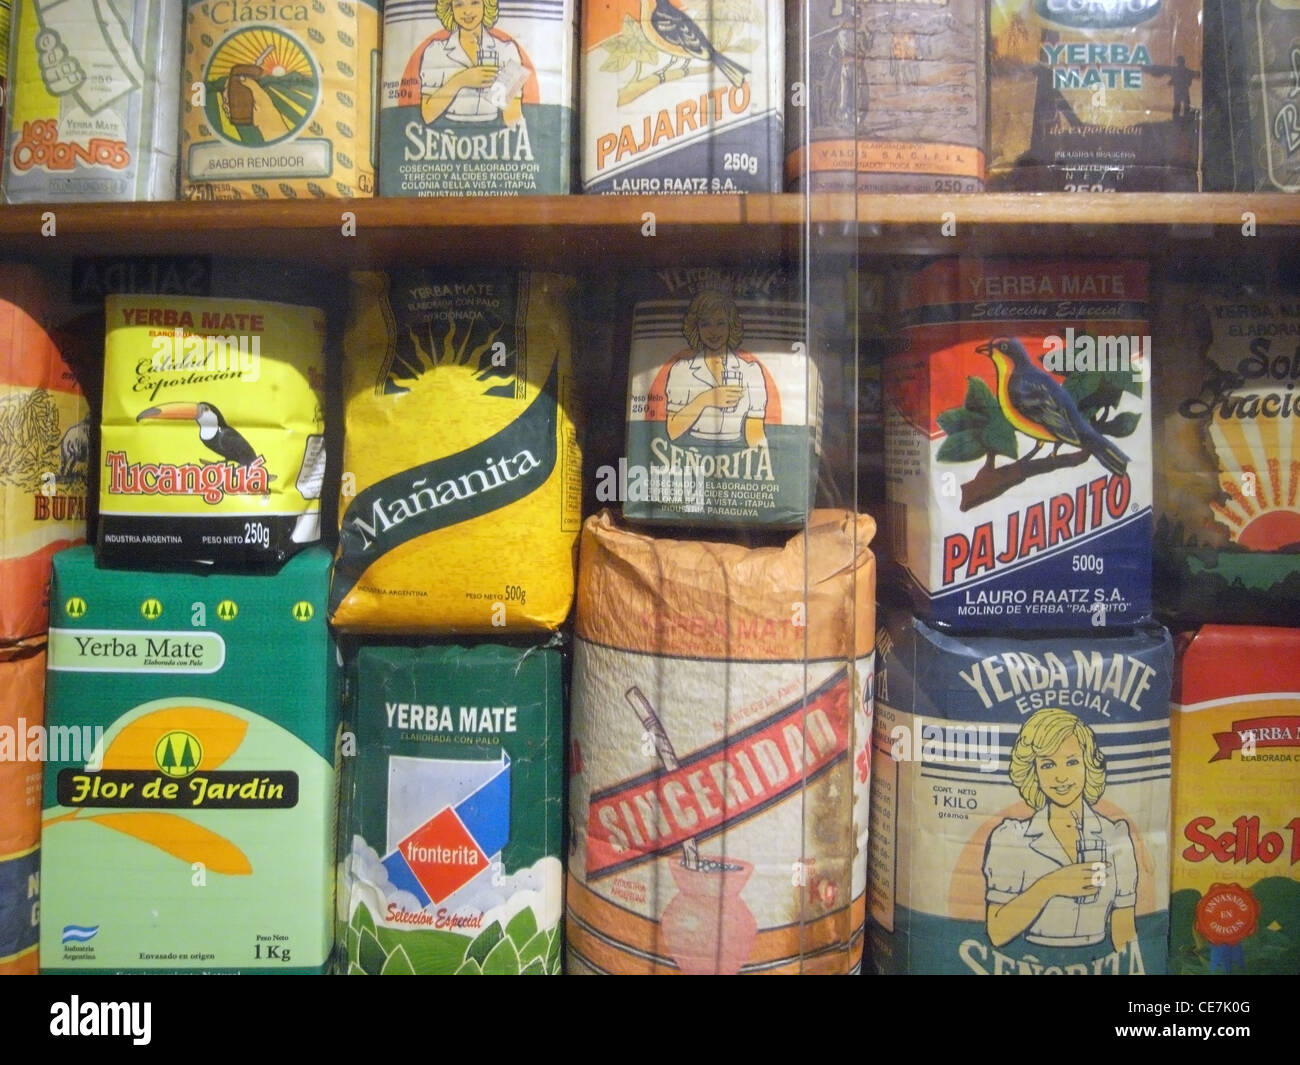 Many antique brands of yerba mate on display in the Museo del Mate, Tigre,  north of Buenos Aires, Argentina. No PR Stock Photo - Alamy